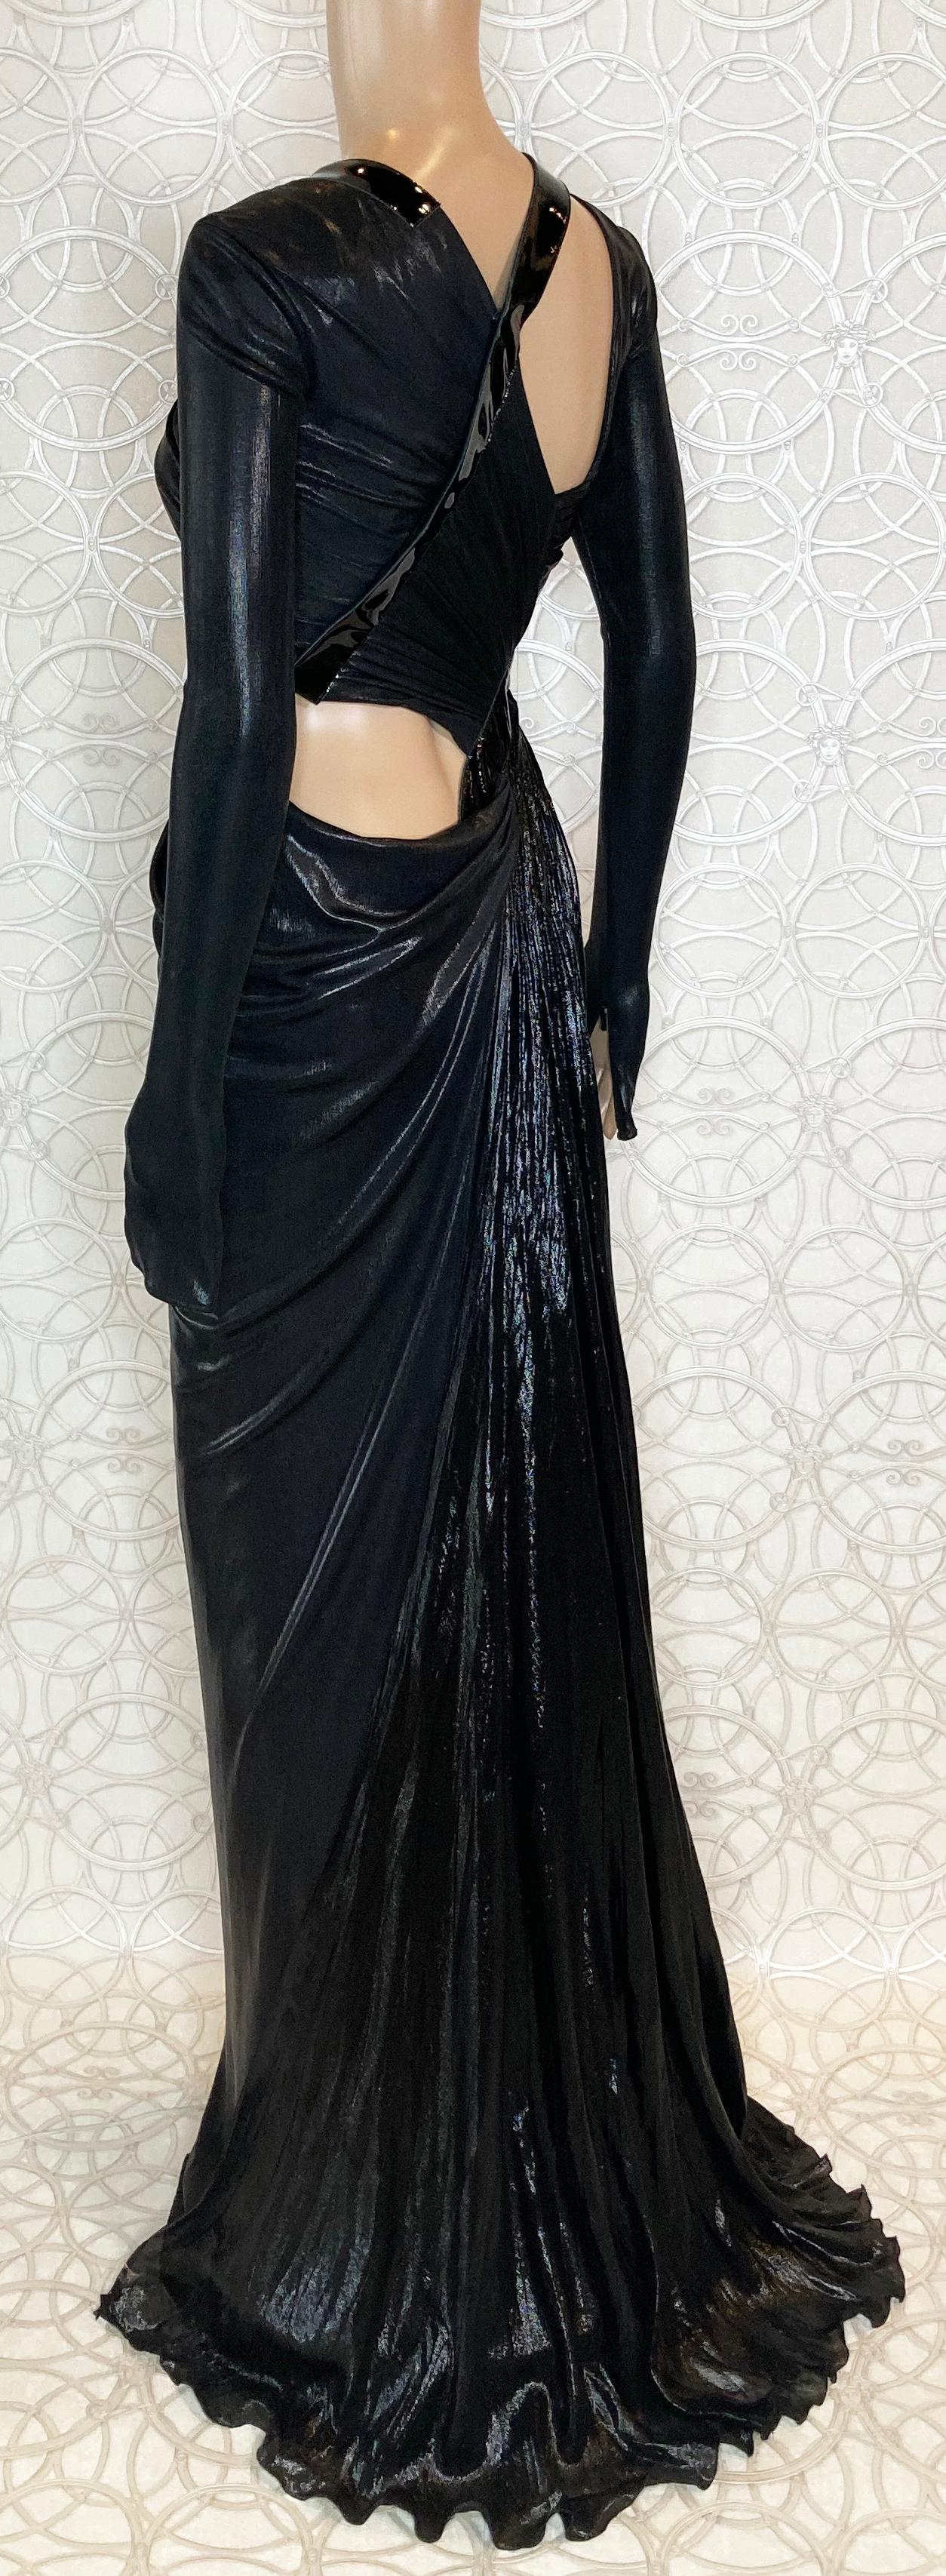 New VERSACE Hottest Black Liquid Jersey Gown With Vinyl Sleeves 4